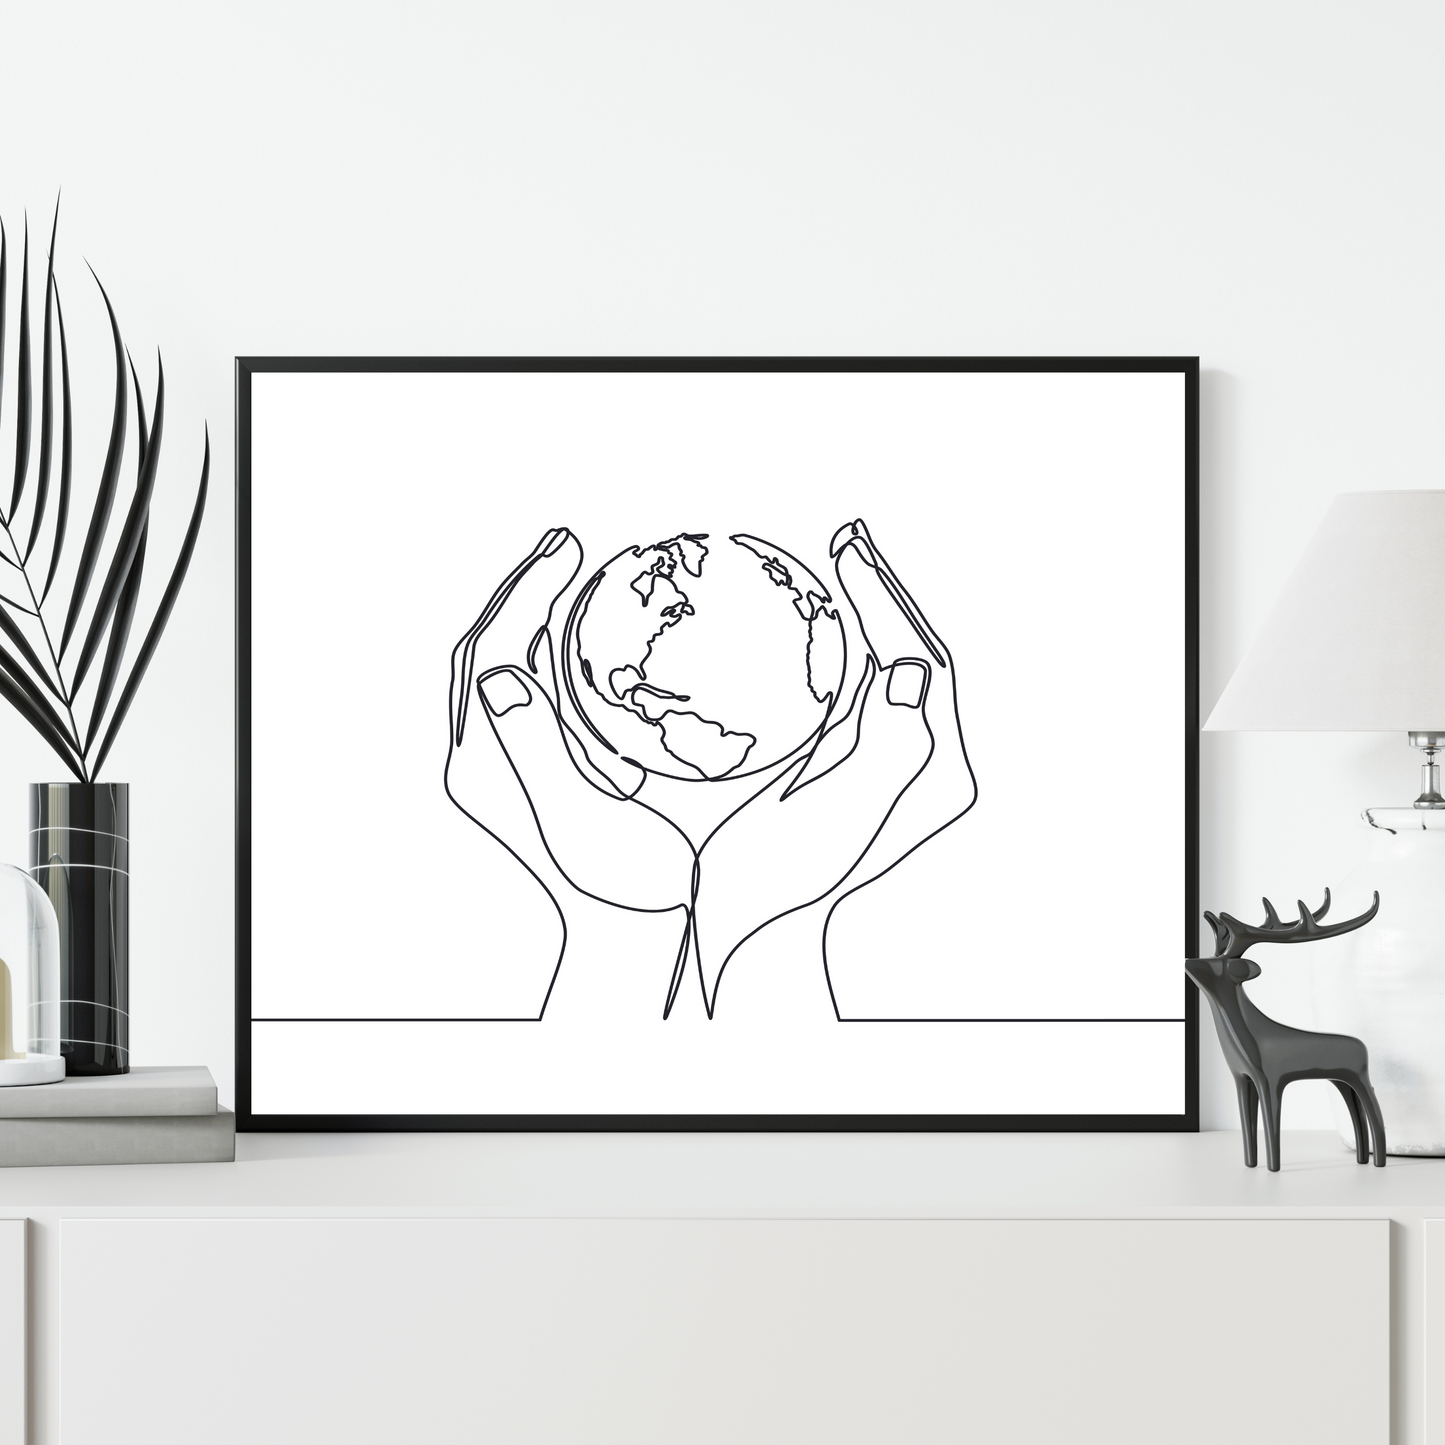 Line drawing of hands holding Earth globe